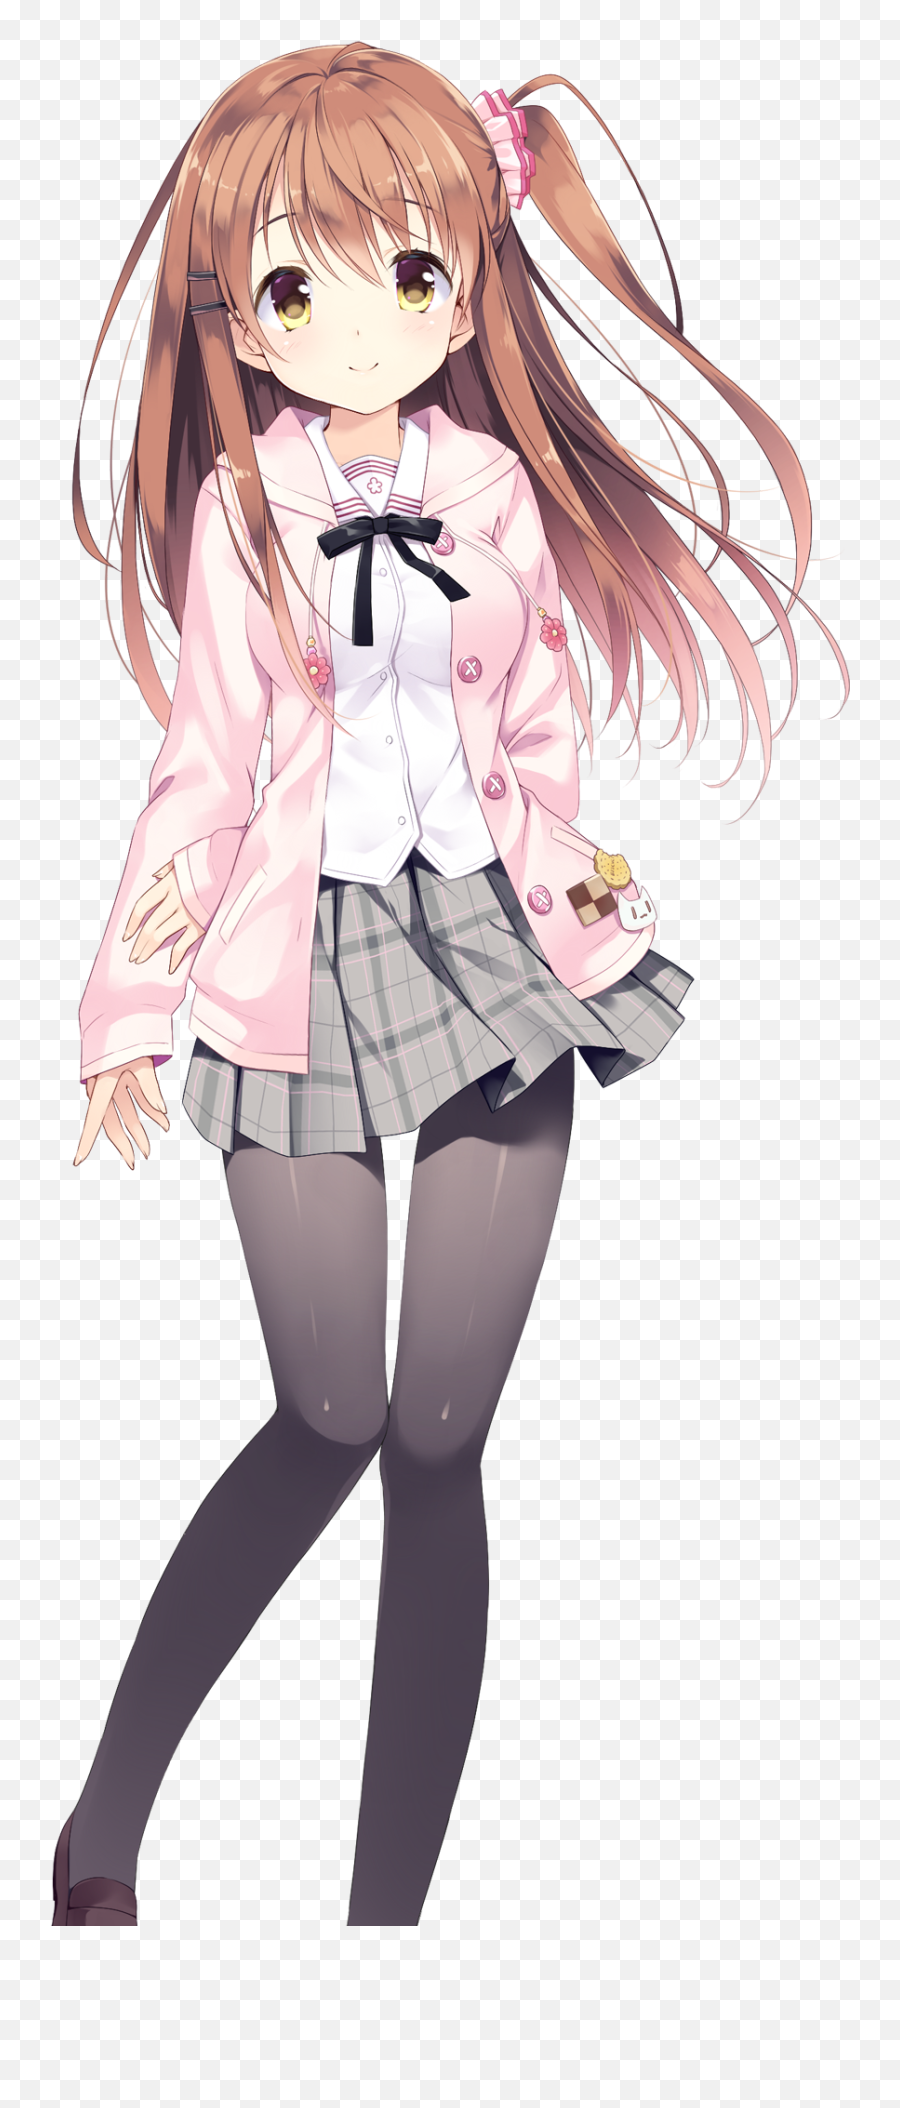 Kawaii Anime Girl Girls Female Full Body Anime Character Png Free Transparent Png Images Pngaaa Com